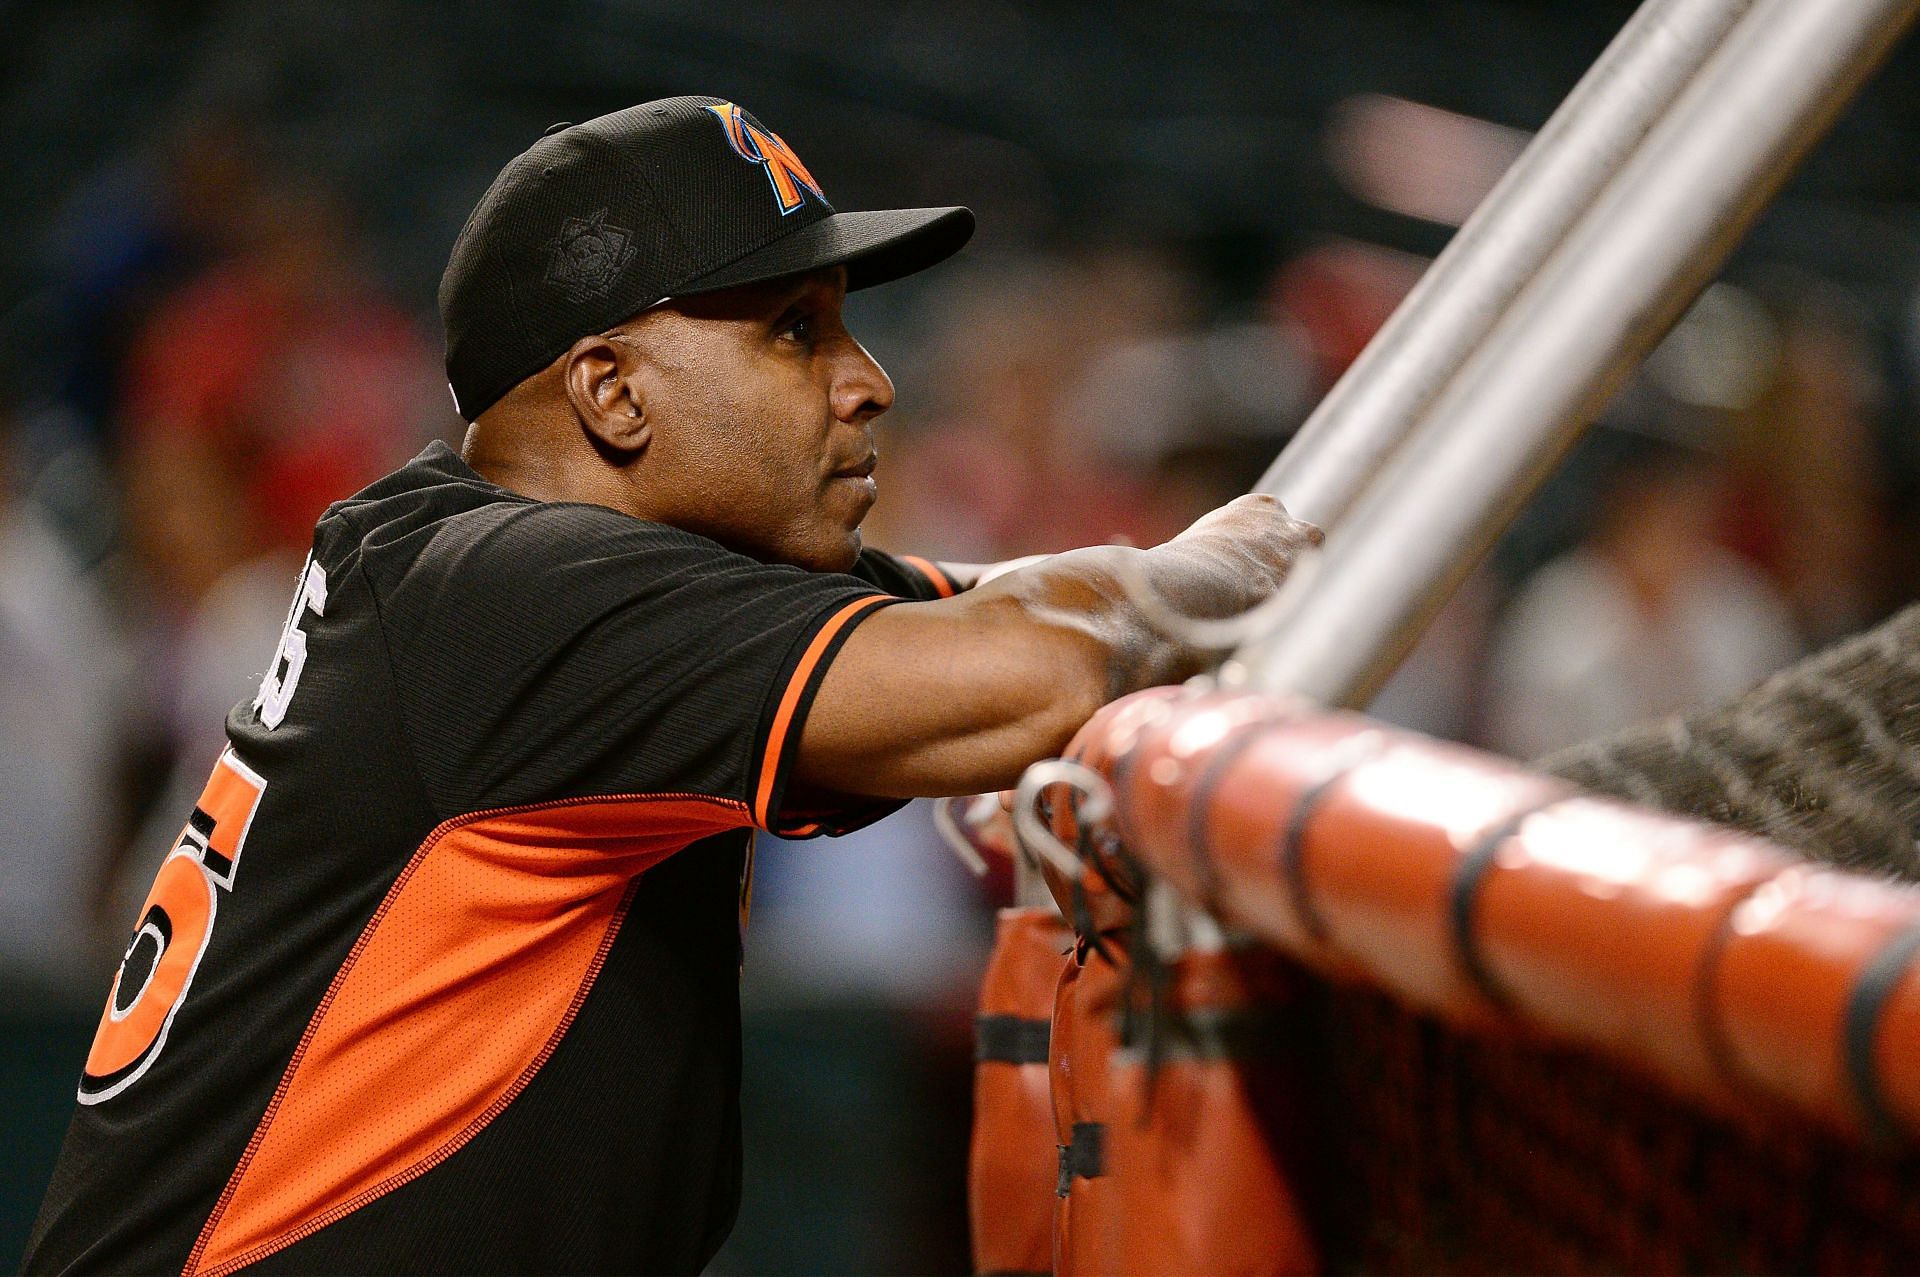 Barry Bonds #25 of the Miami Marlins watches batting practice prior to the MLB game